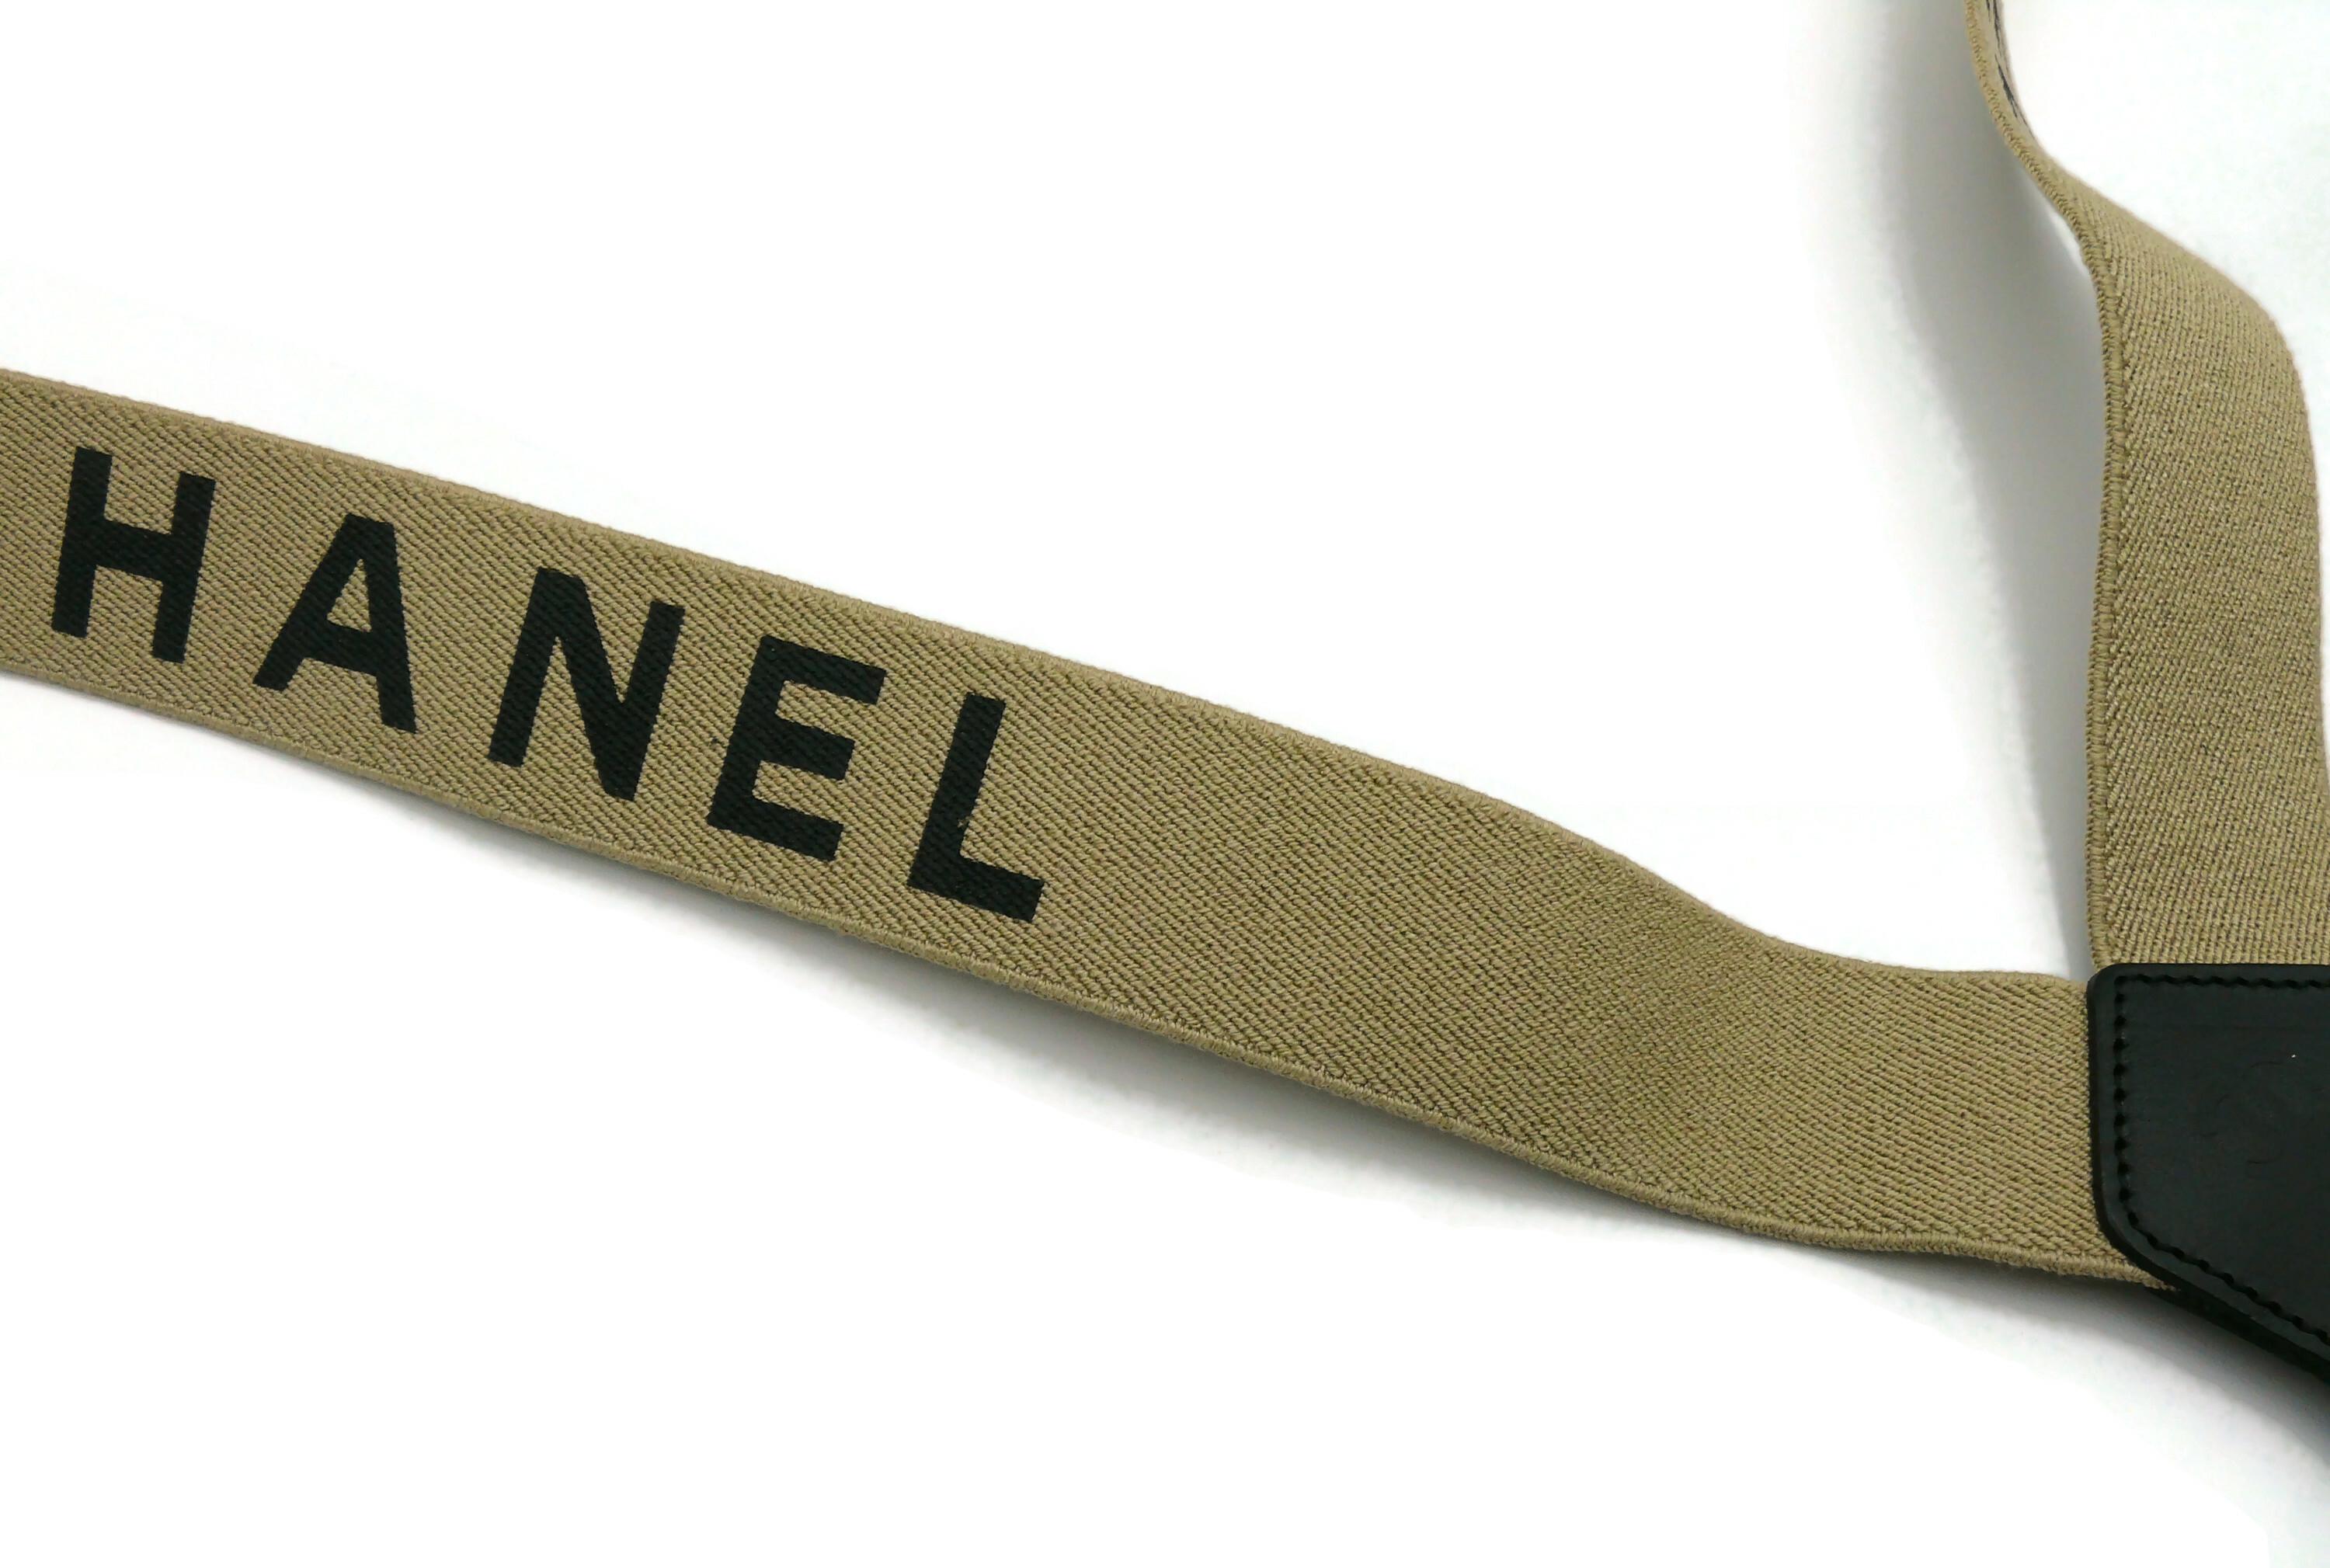 CHANEL by KARL LAGERFELD Vintage Iconic Light Brown and Black Suspenders, 1994 For Sale 4